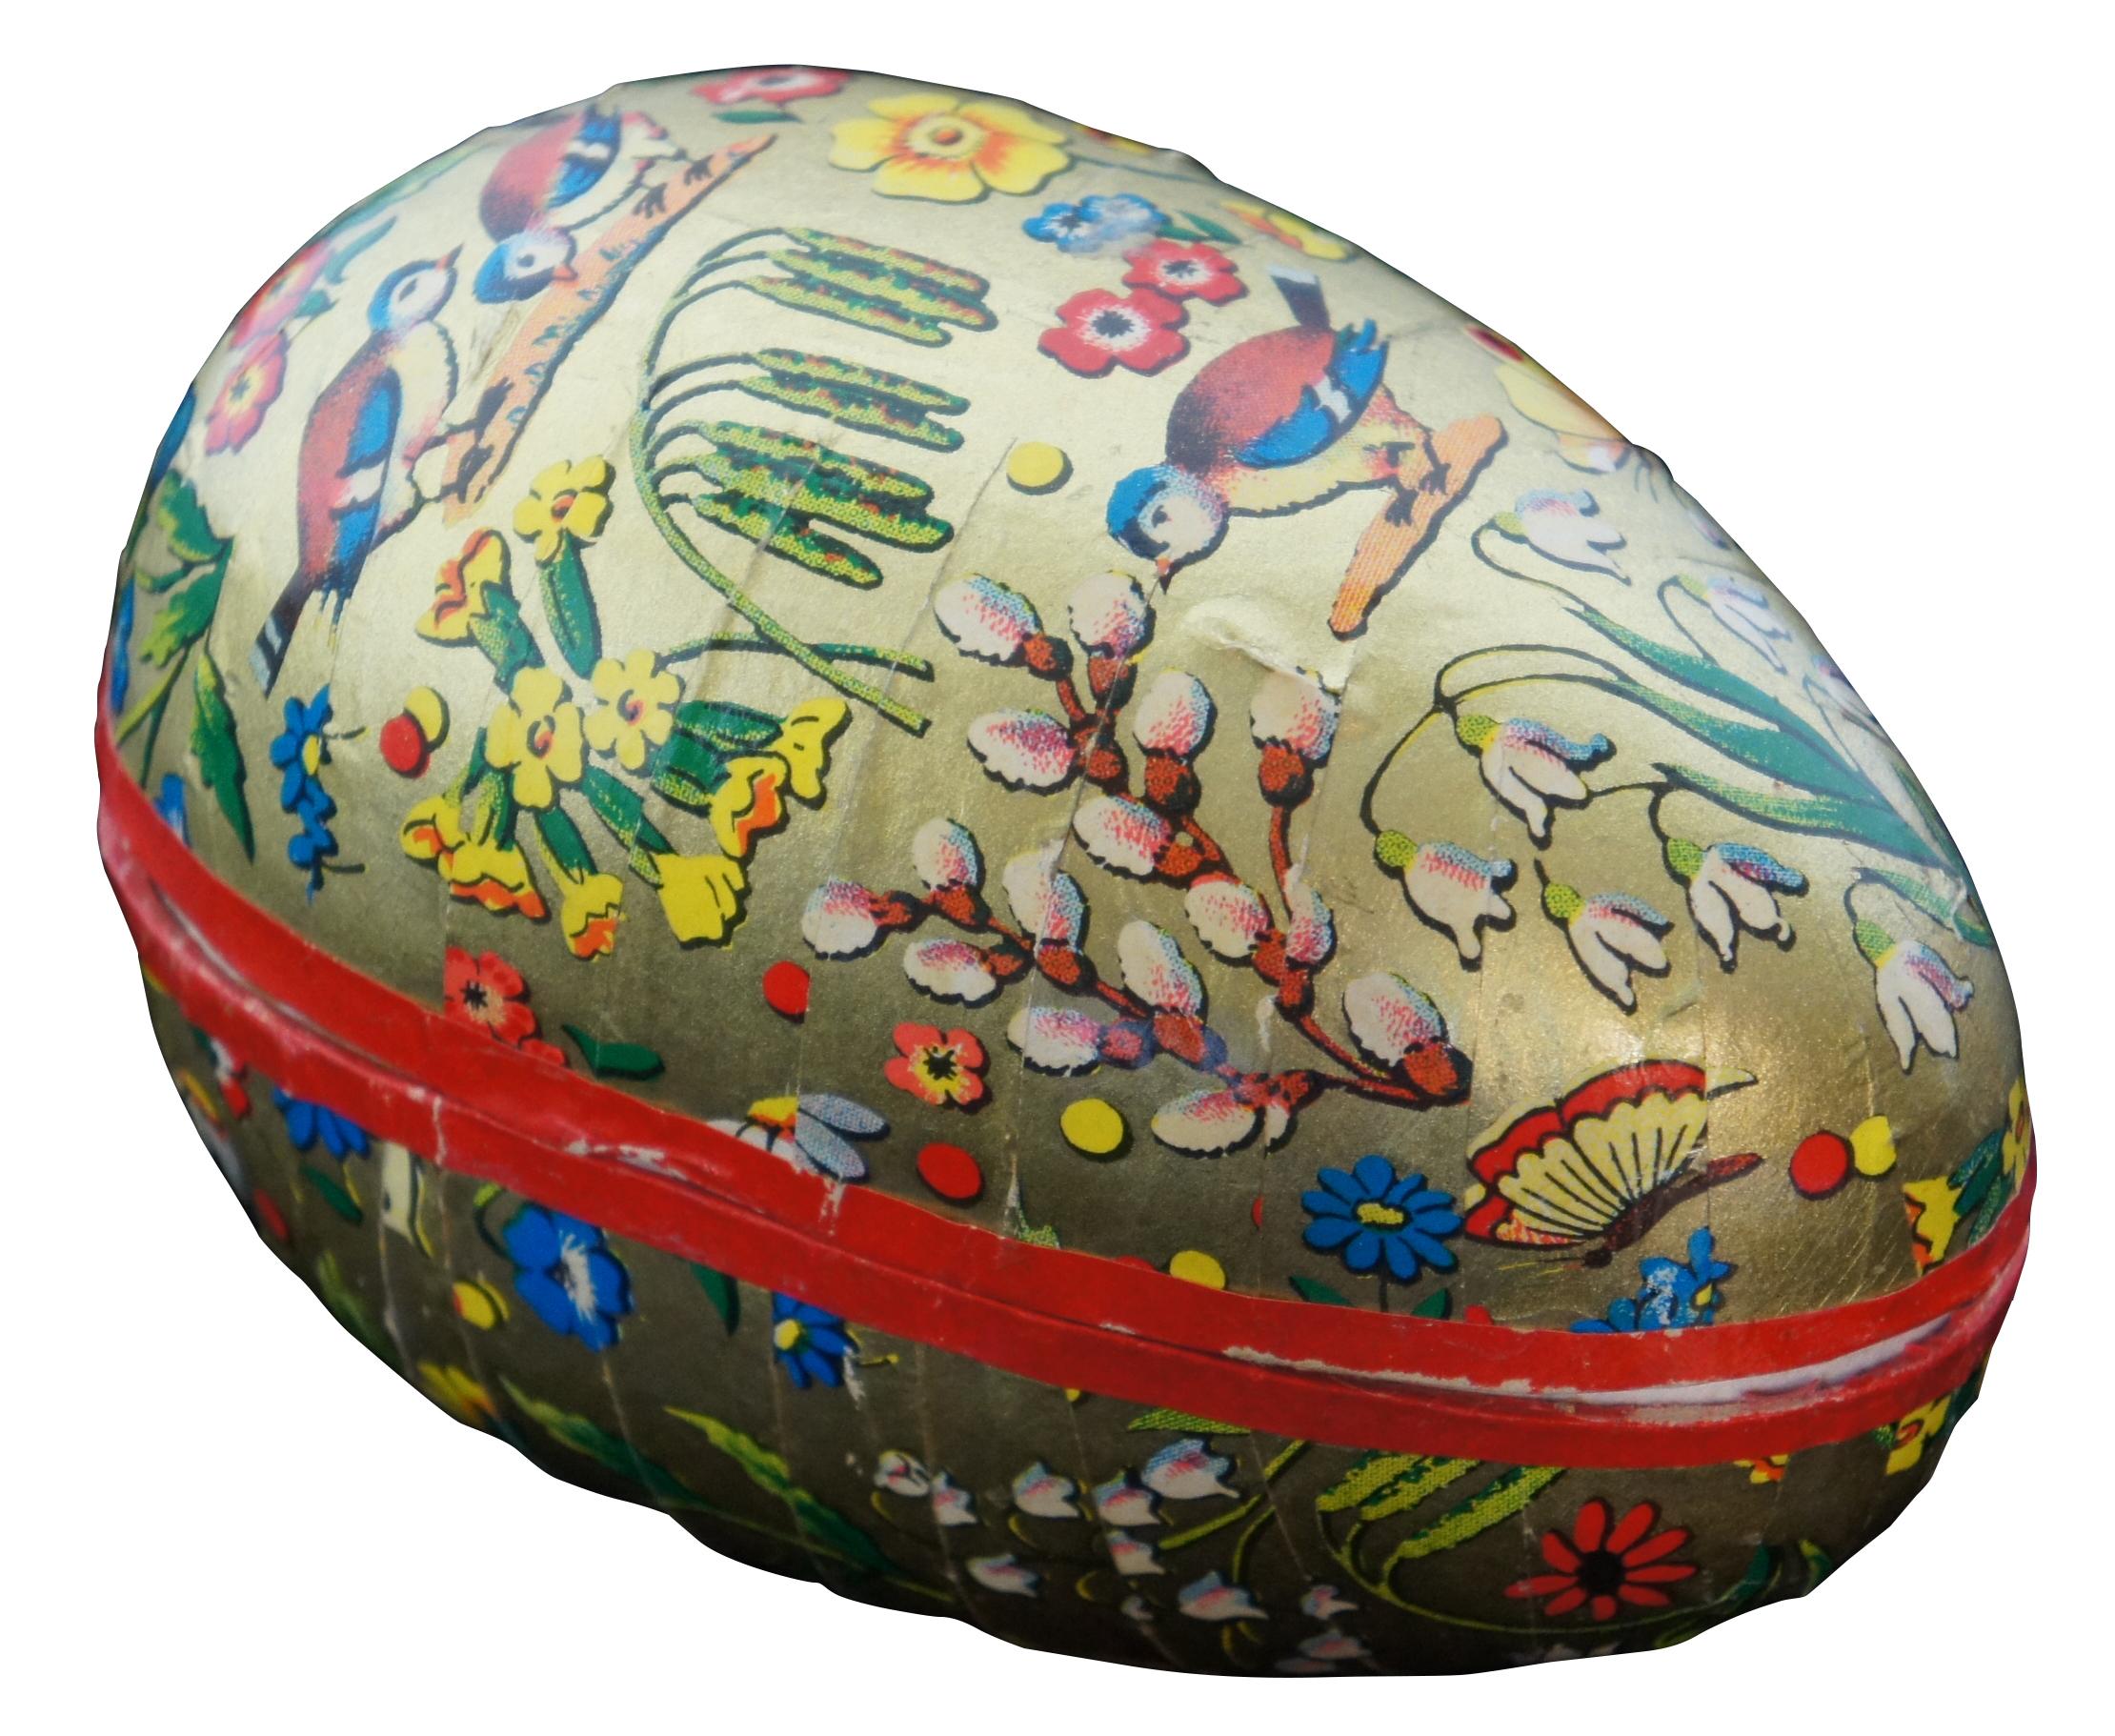 Antique West Germany papier mâché Easter egg candy container in metallic gold with images of butterflies, birds, lily of the valley, pussy willows, and other flowers. Measure: 5